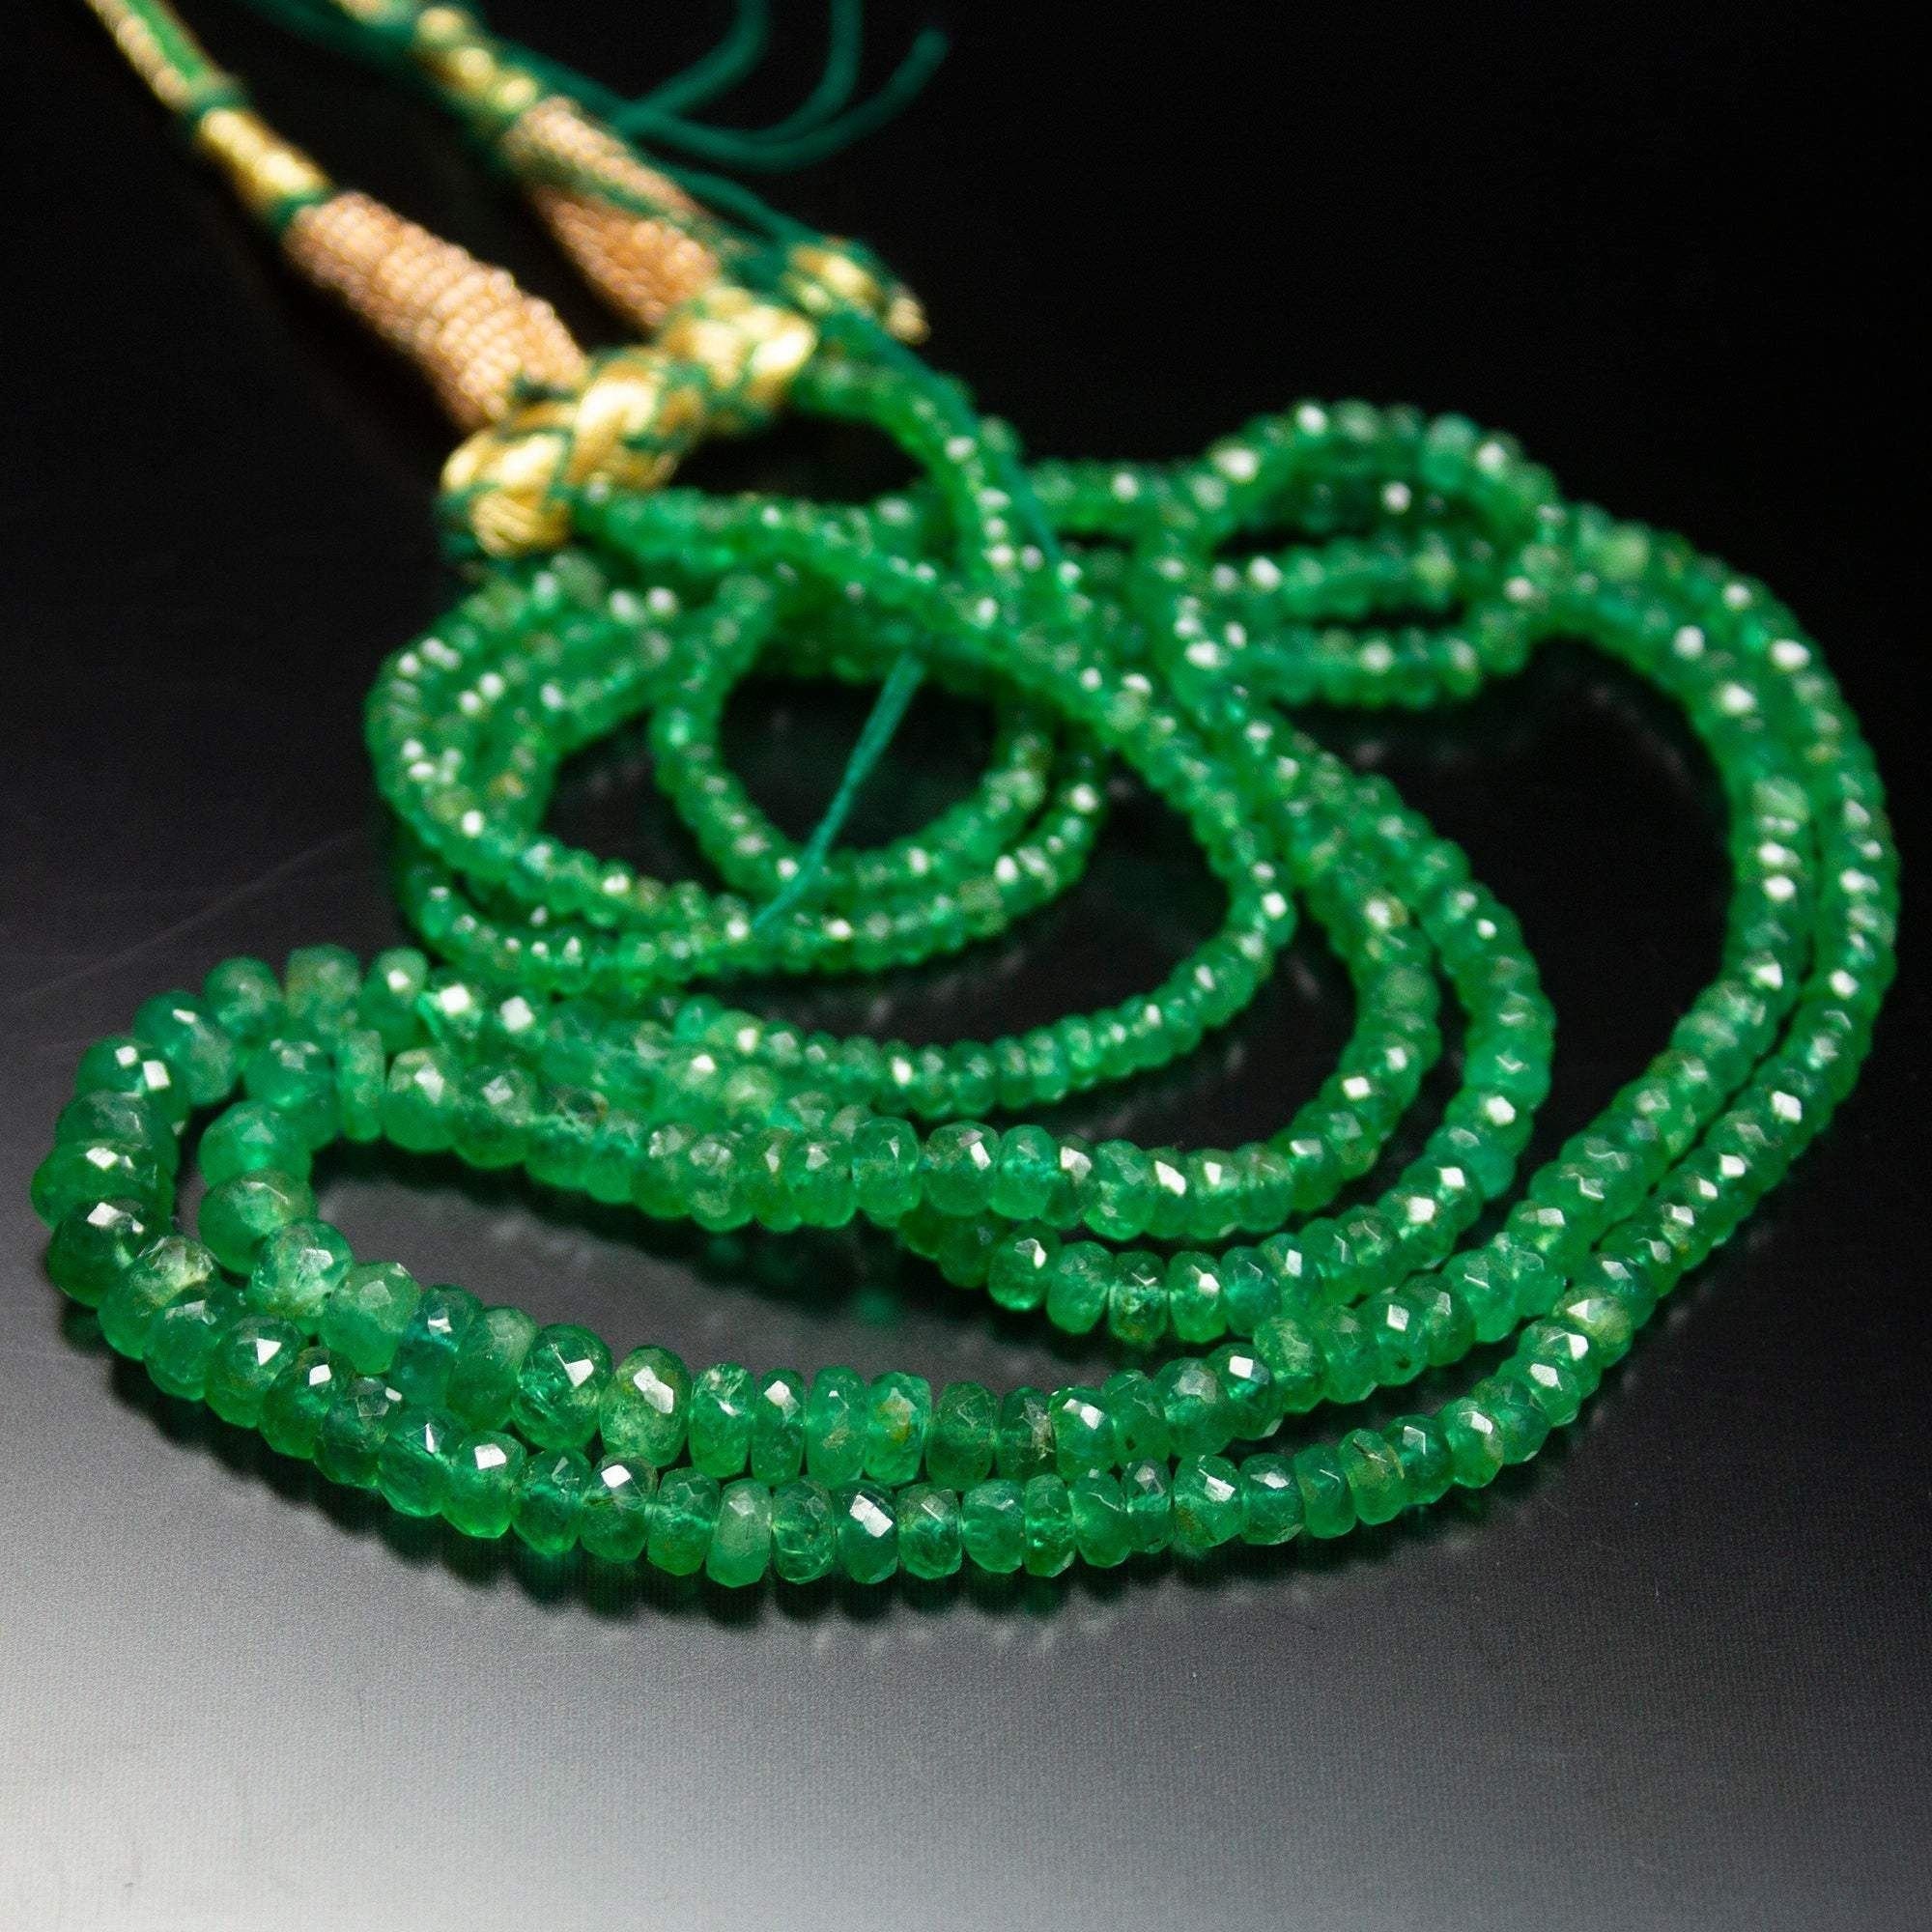 Natural Zambian Green Emerald Smooth Rondelle Gemstone Loose Beads 6.5 2mm 3mm EMR7256